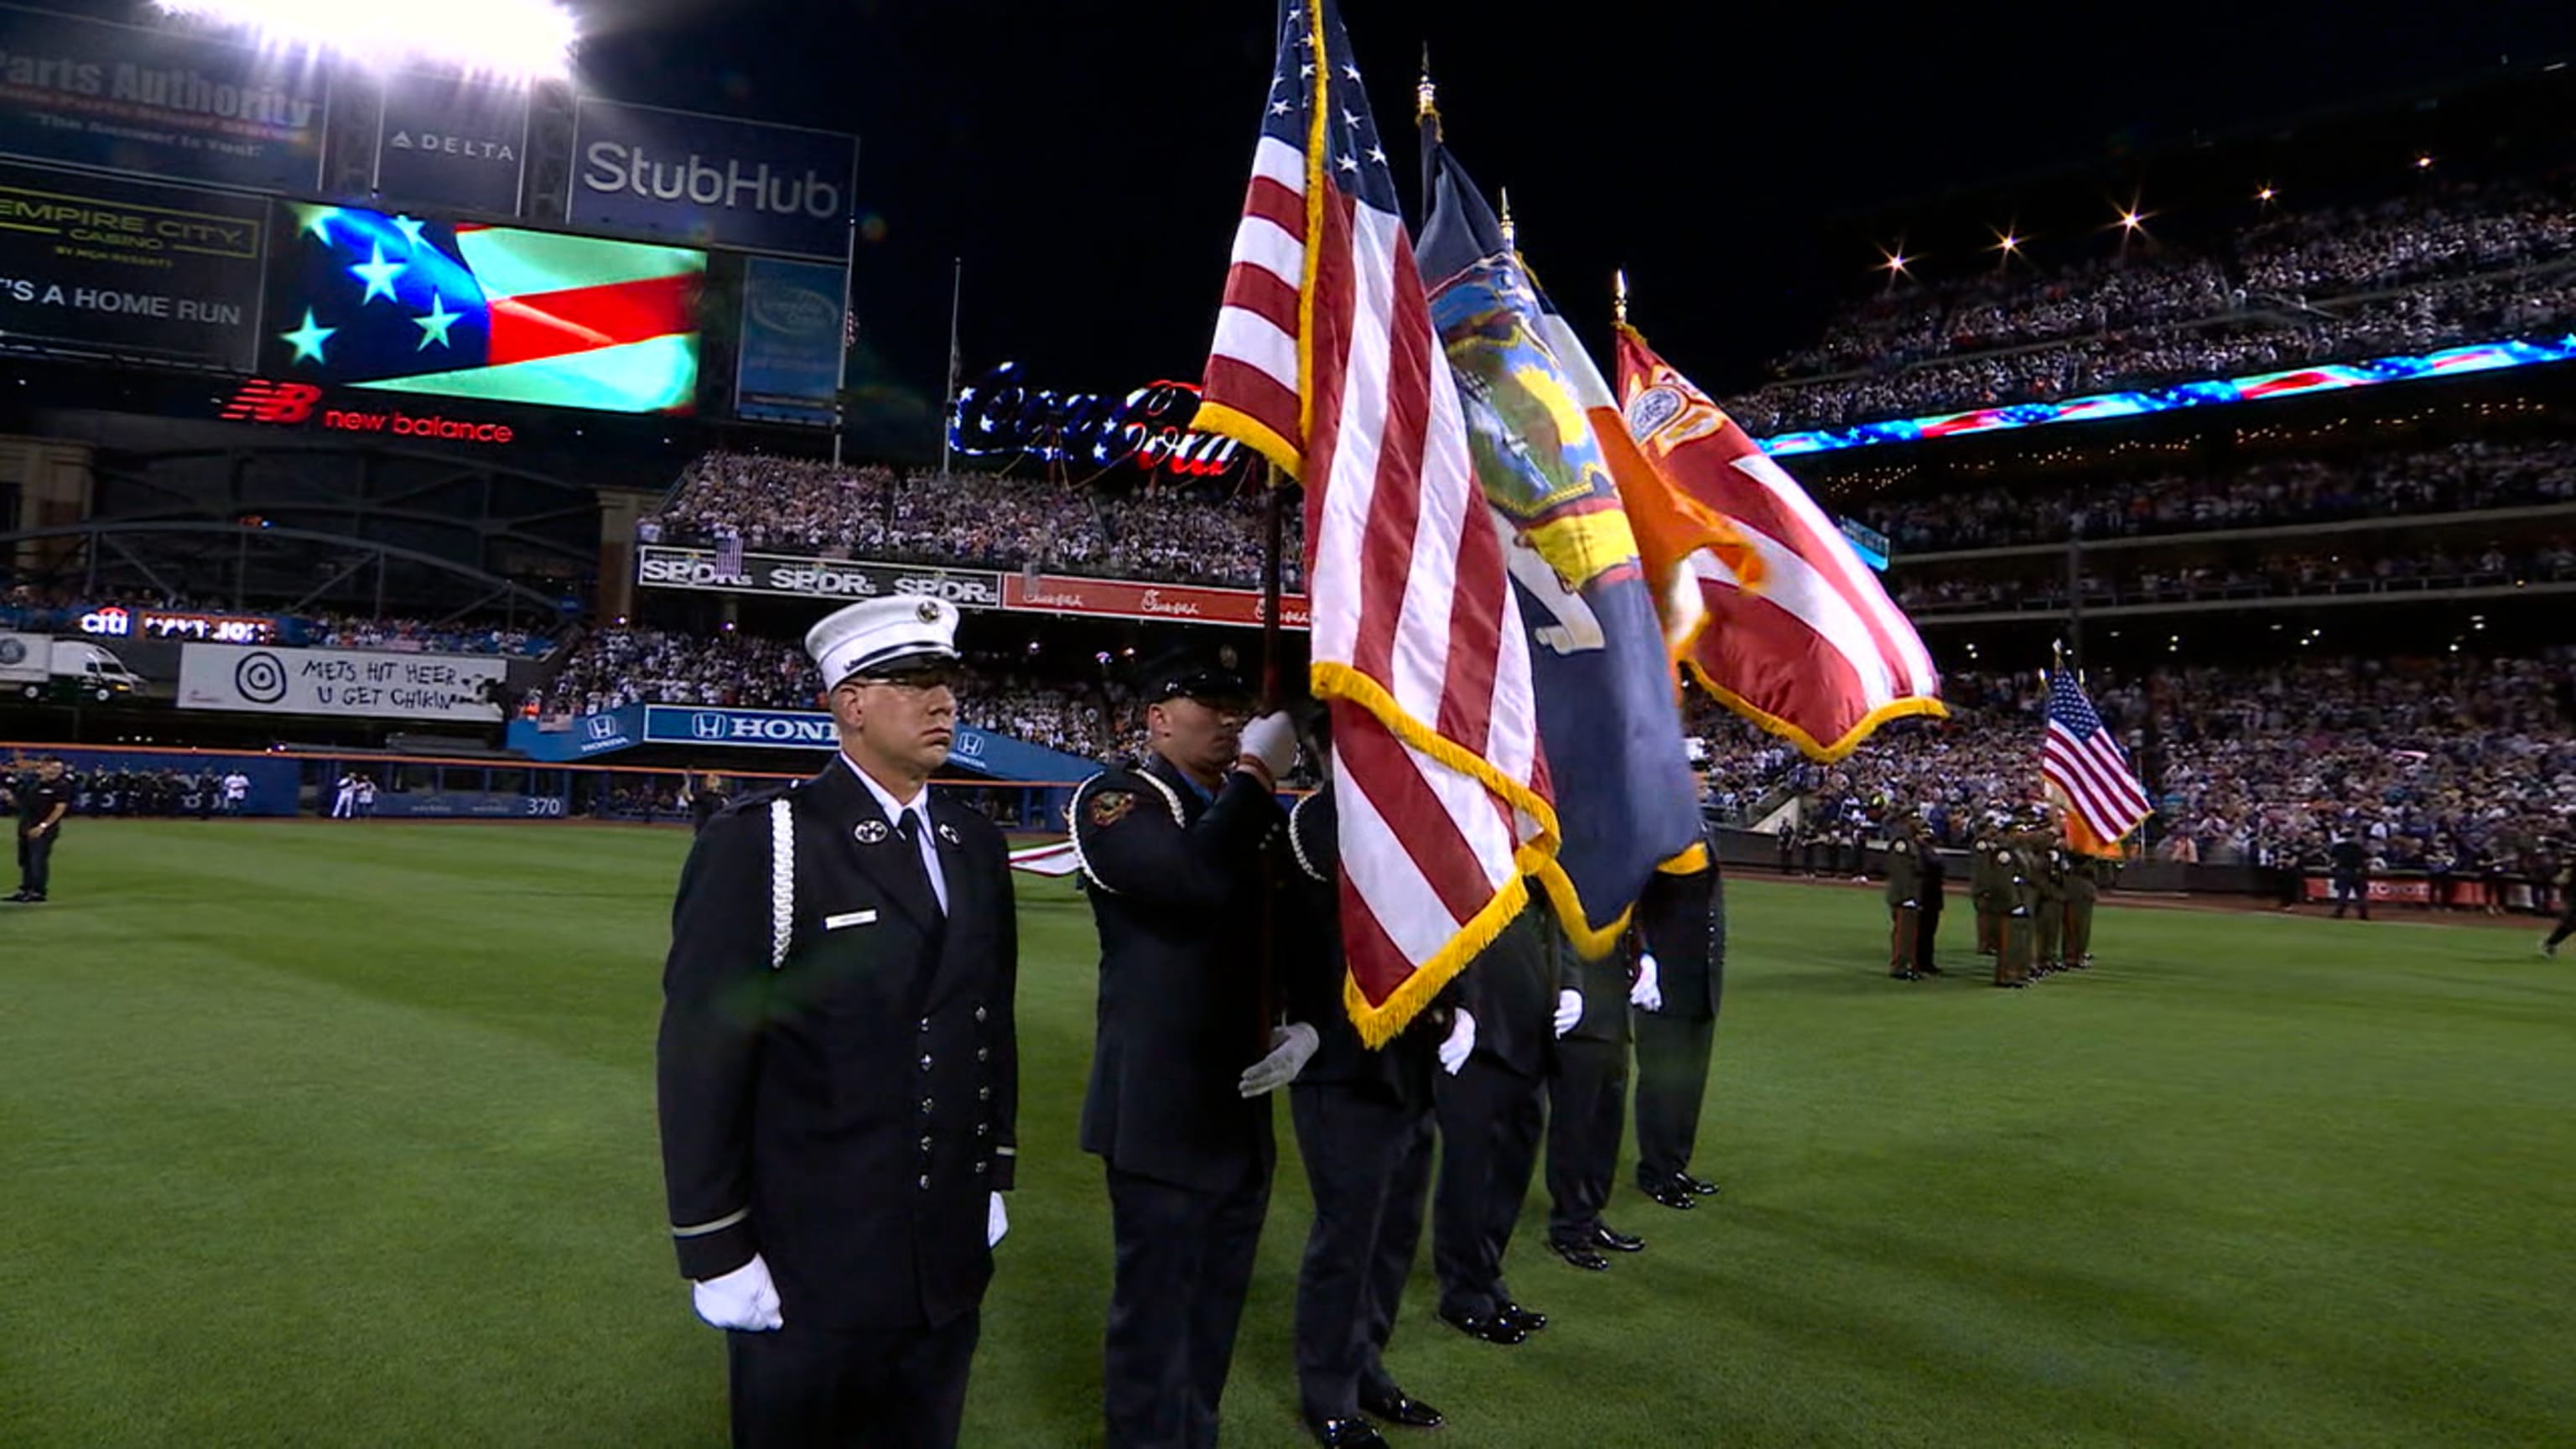 Mets announce ceremony details for 20th anniversary of 9/11